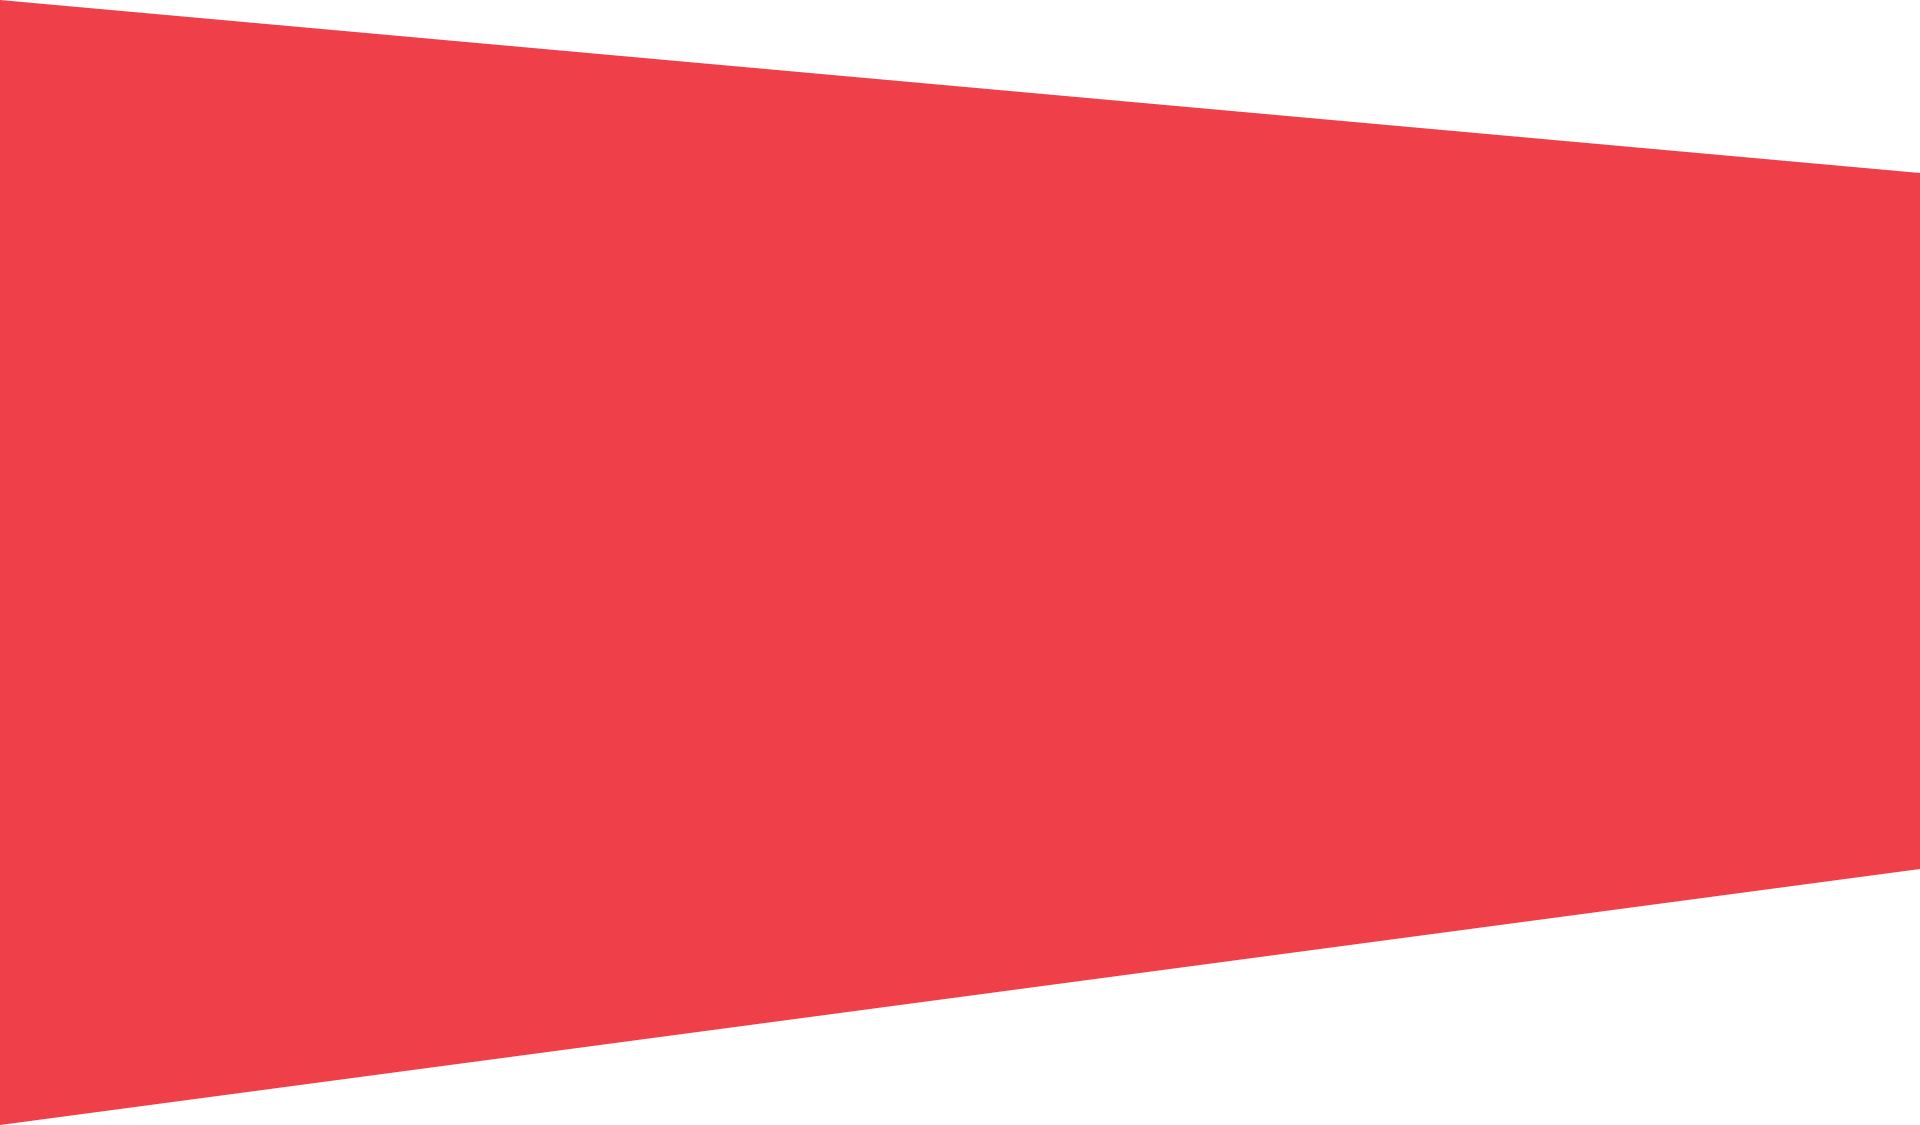 Red trapezoid